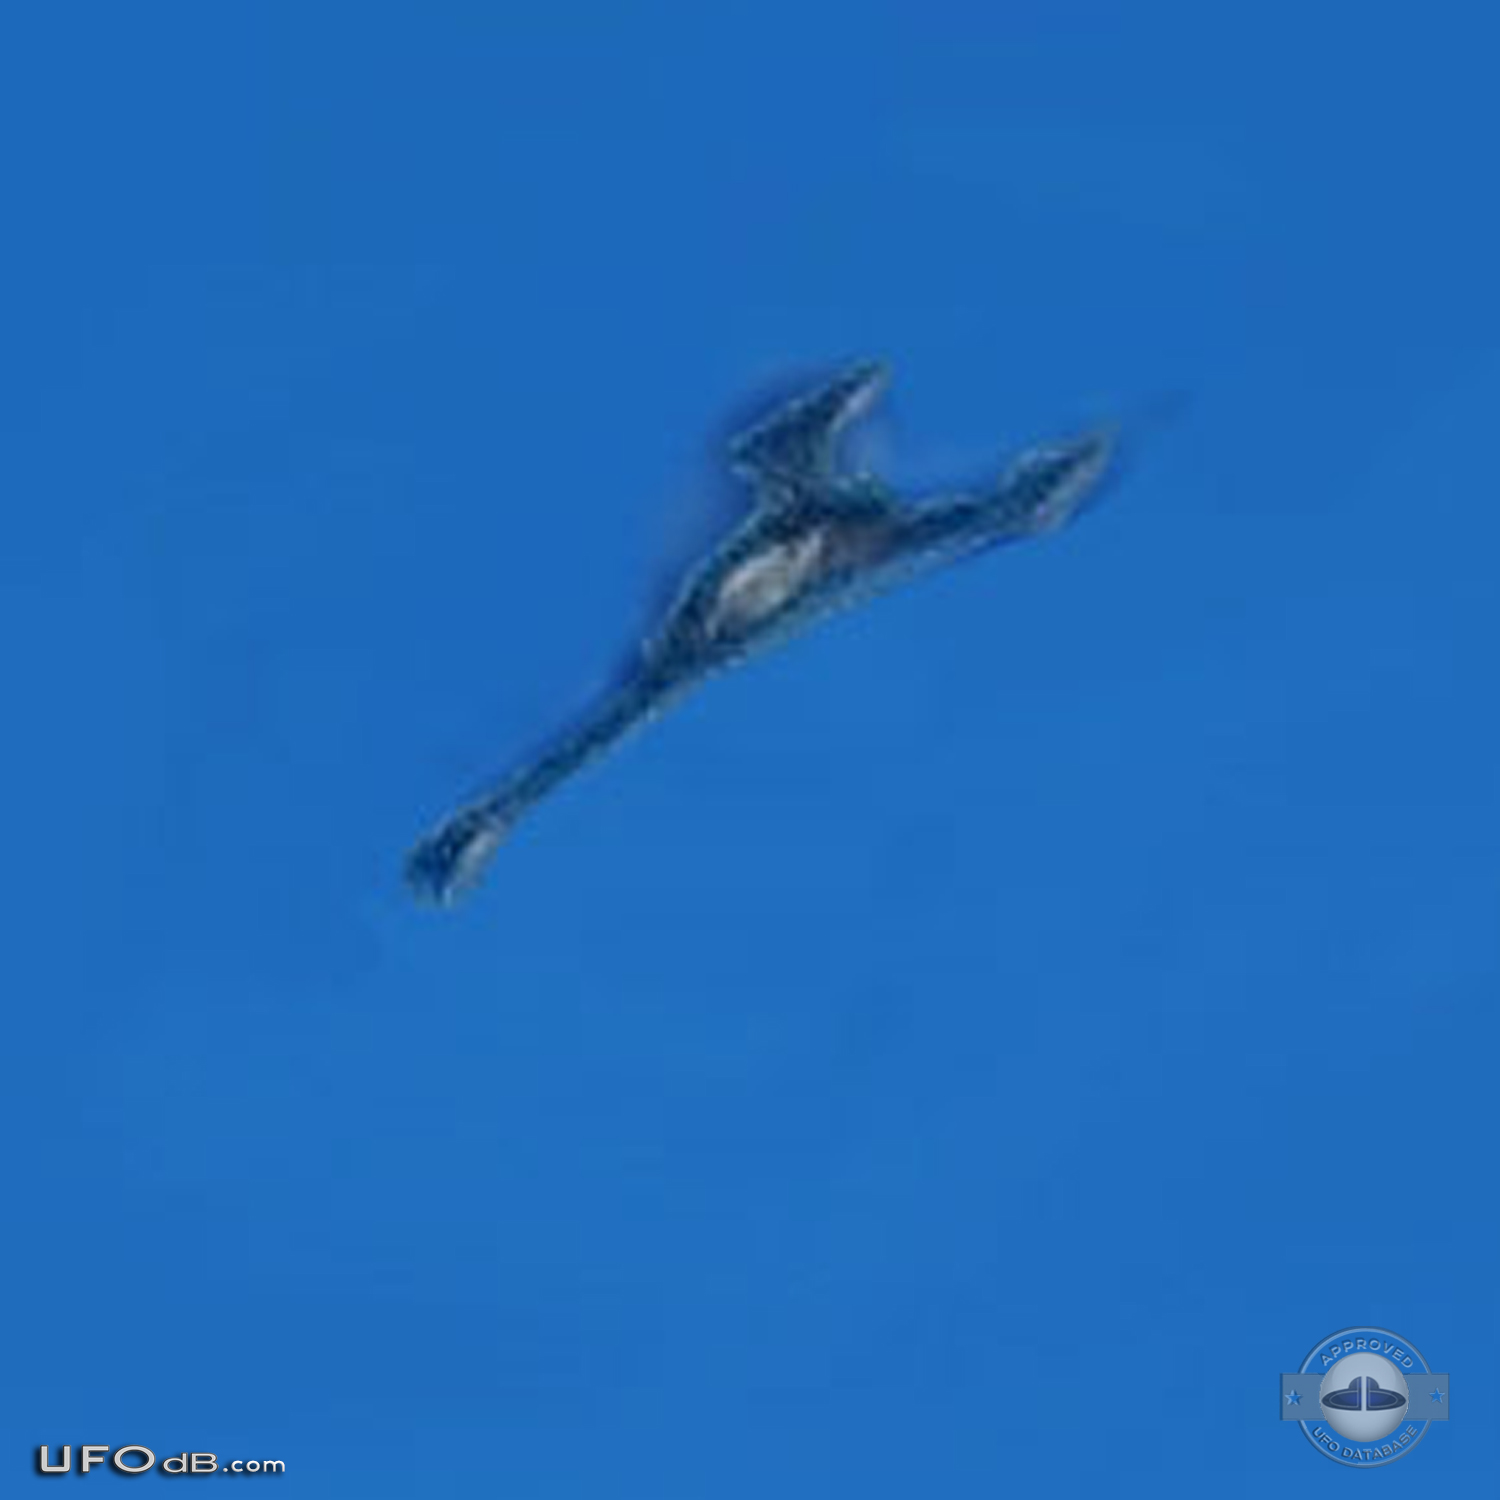 UFO similar to Star Trek Klingon ship seen over Canary Island in 2011 UFO Picture #483-4